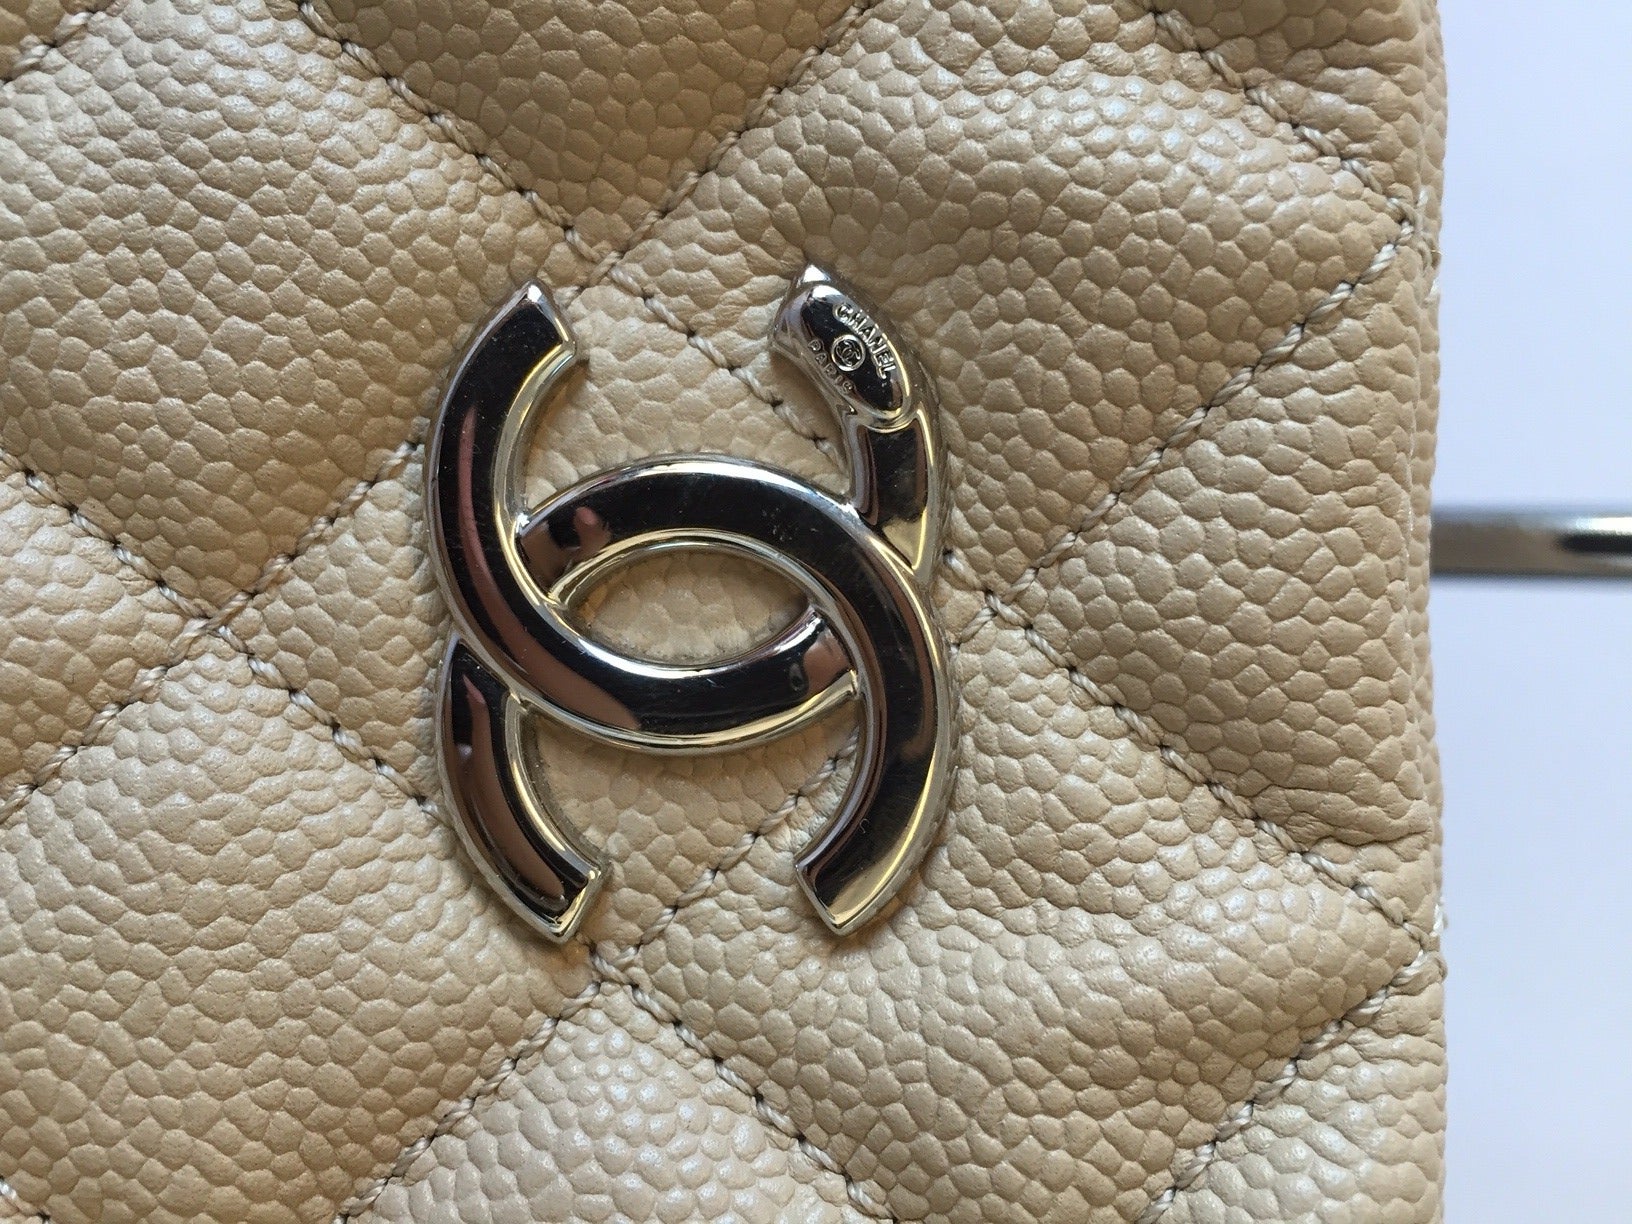 Brand: Chanel
Manufactured: Italy 
Color: Beige 
Date Code: 1899960
Magnetic Closure

Bag Length: 15